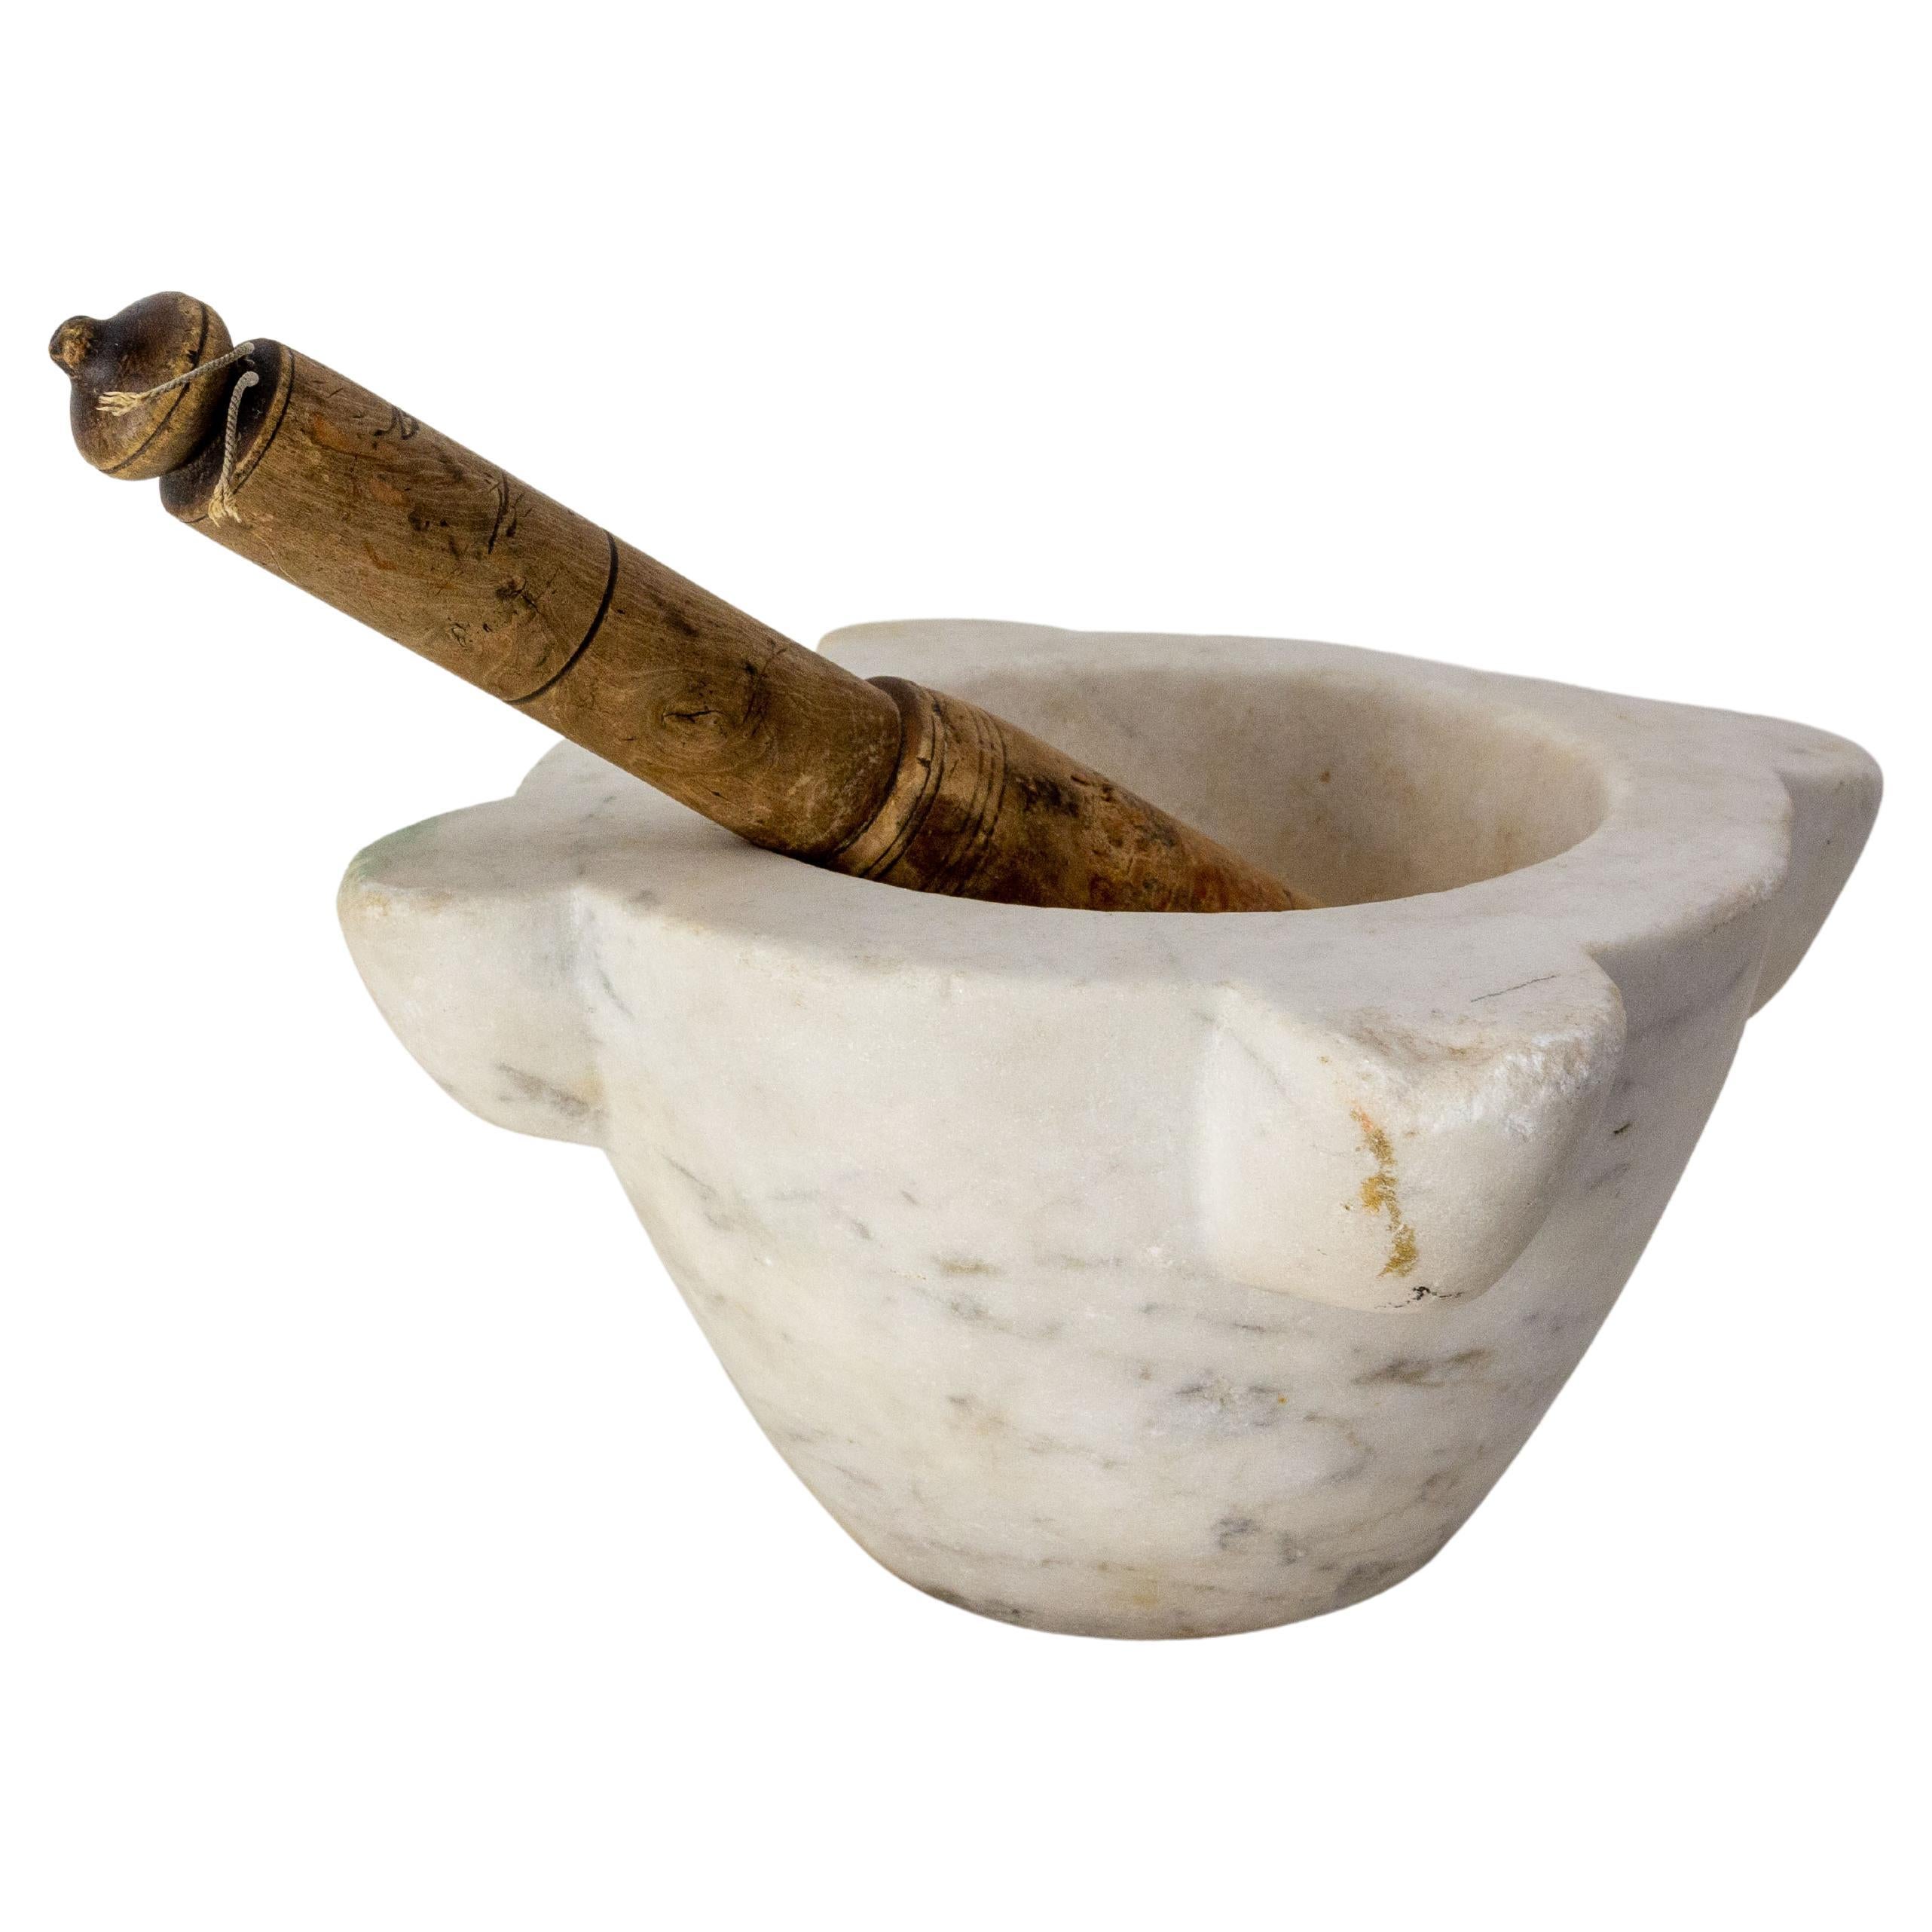 Pharmacy mortar in marble, France, 19th century with its wood pestle.
Length of the pestle 9.84 in.(25 cm)
Good antique condition

Shipping:
L 20.5 P 20.5 H 17.5 cm pilon 25 cm 6.5 kg.